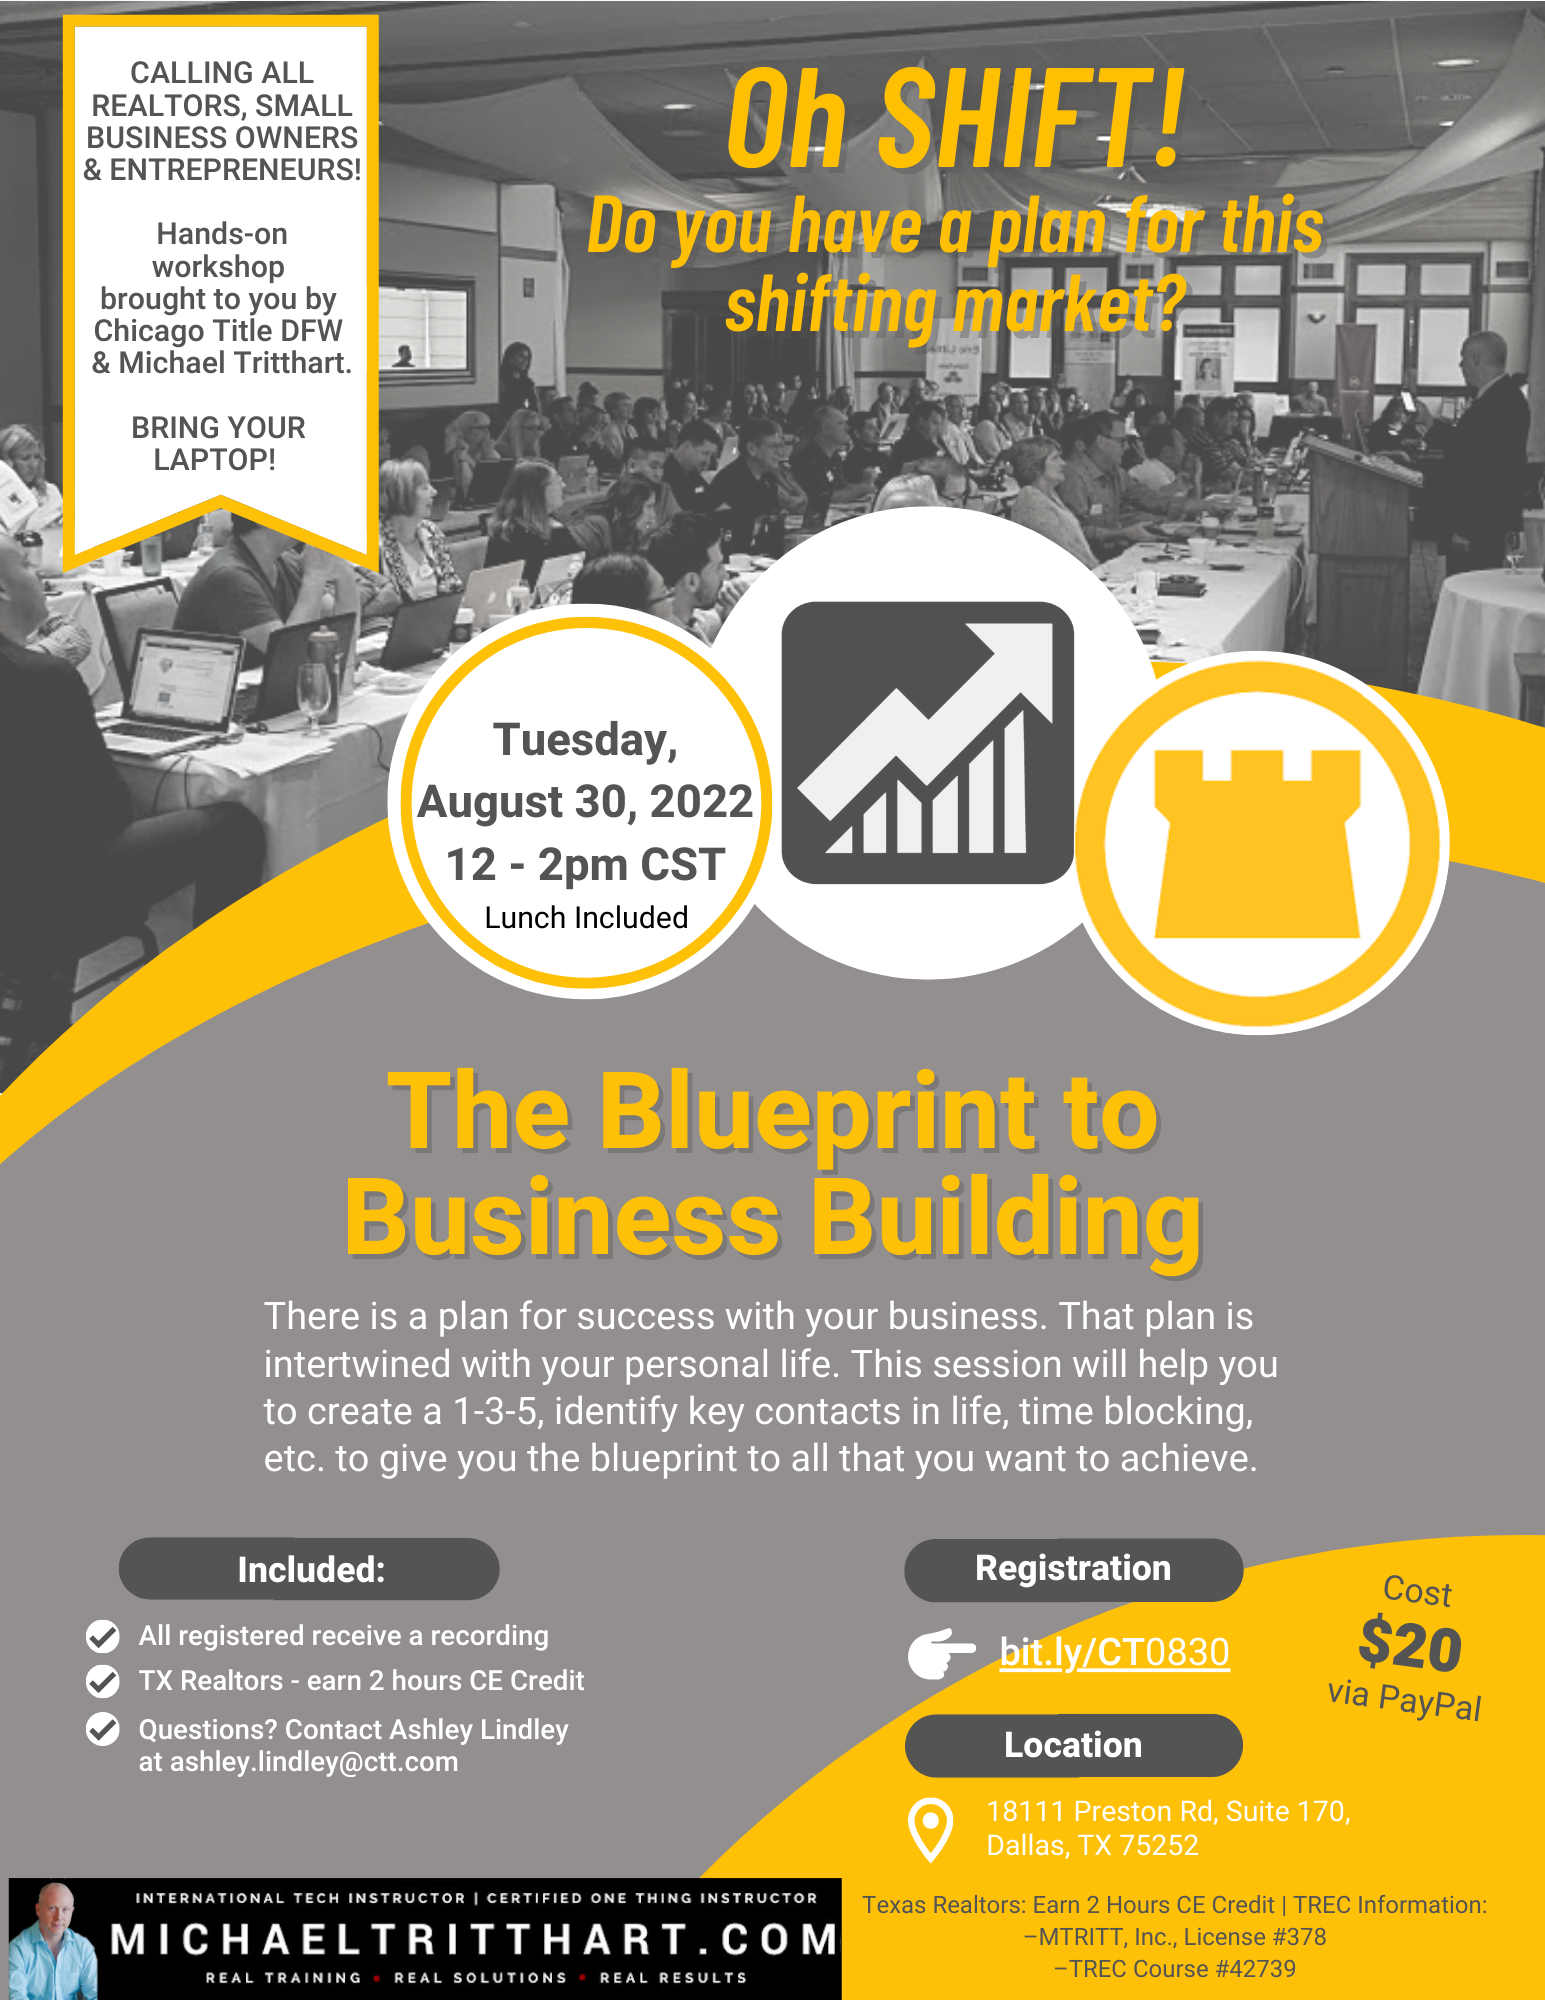 The Blueprint for Business Building